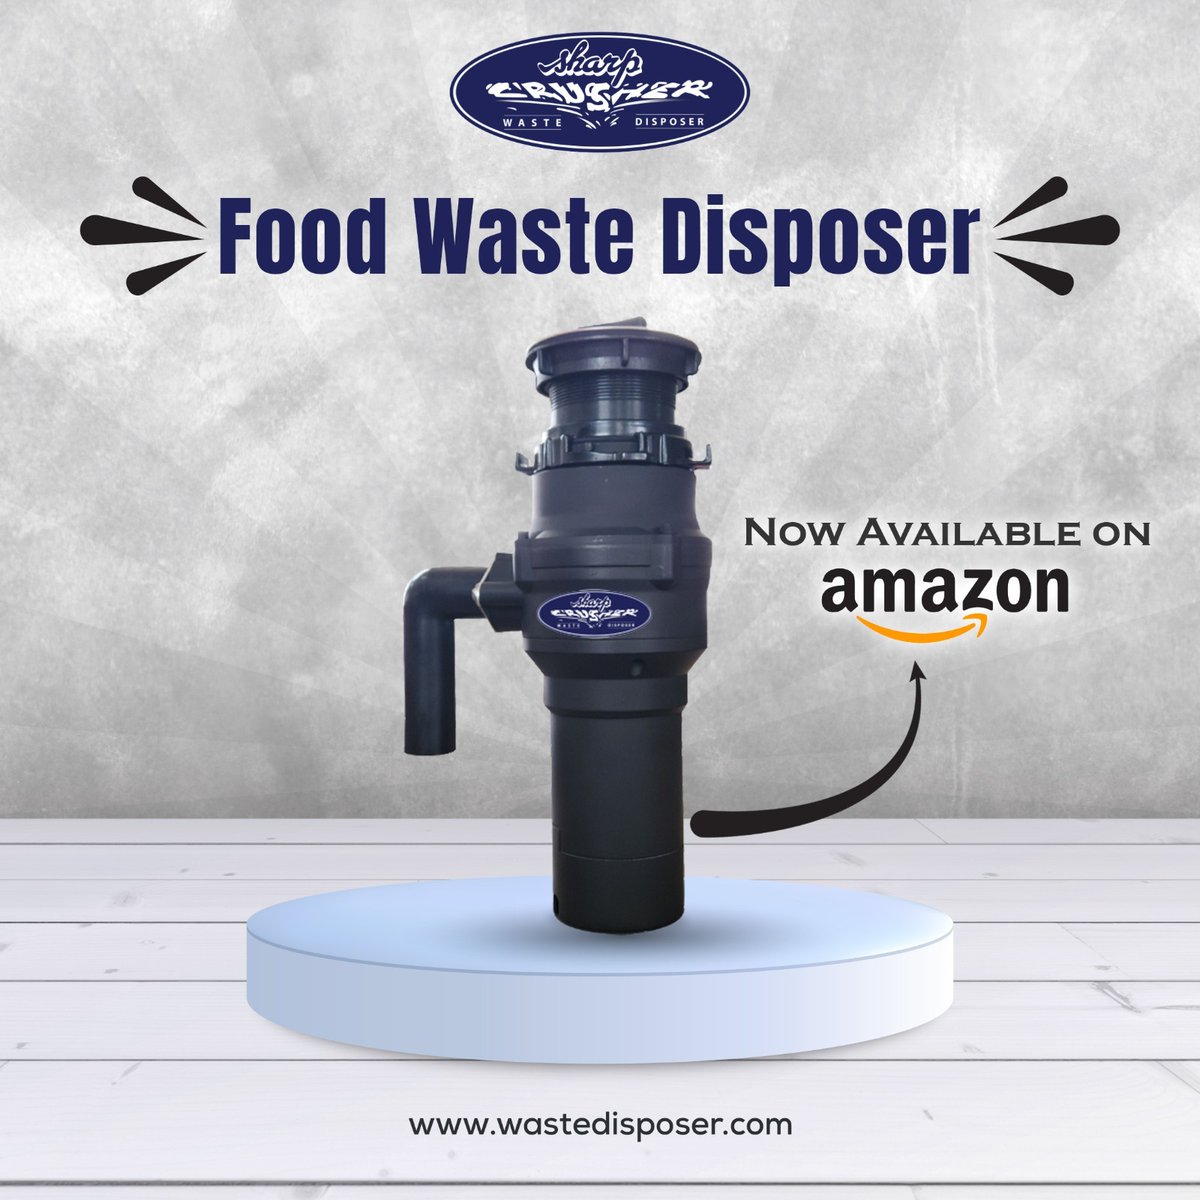 No more overflowing bins or messy #countertops. With #SharpCrusher, you can enjoy a cleaner, more #hygienic kitchen environment while doing your part for the planet.

Explore our range of solutions at wastedisposer.com
 
#Wastedisposer #crusher #kitchenrenovation #kitchen